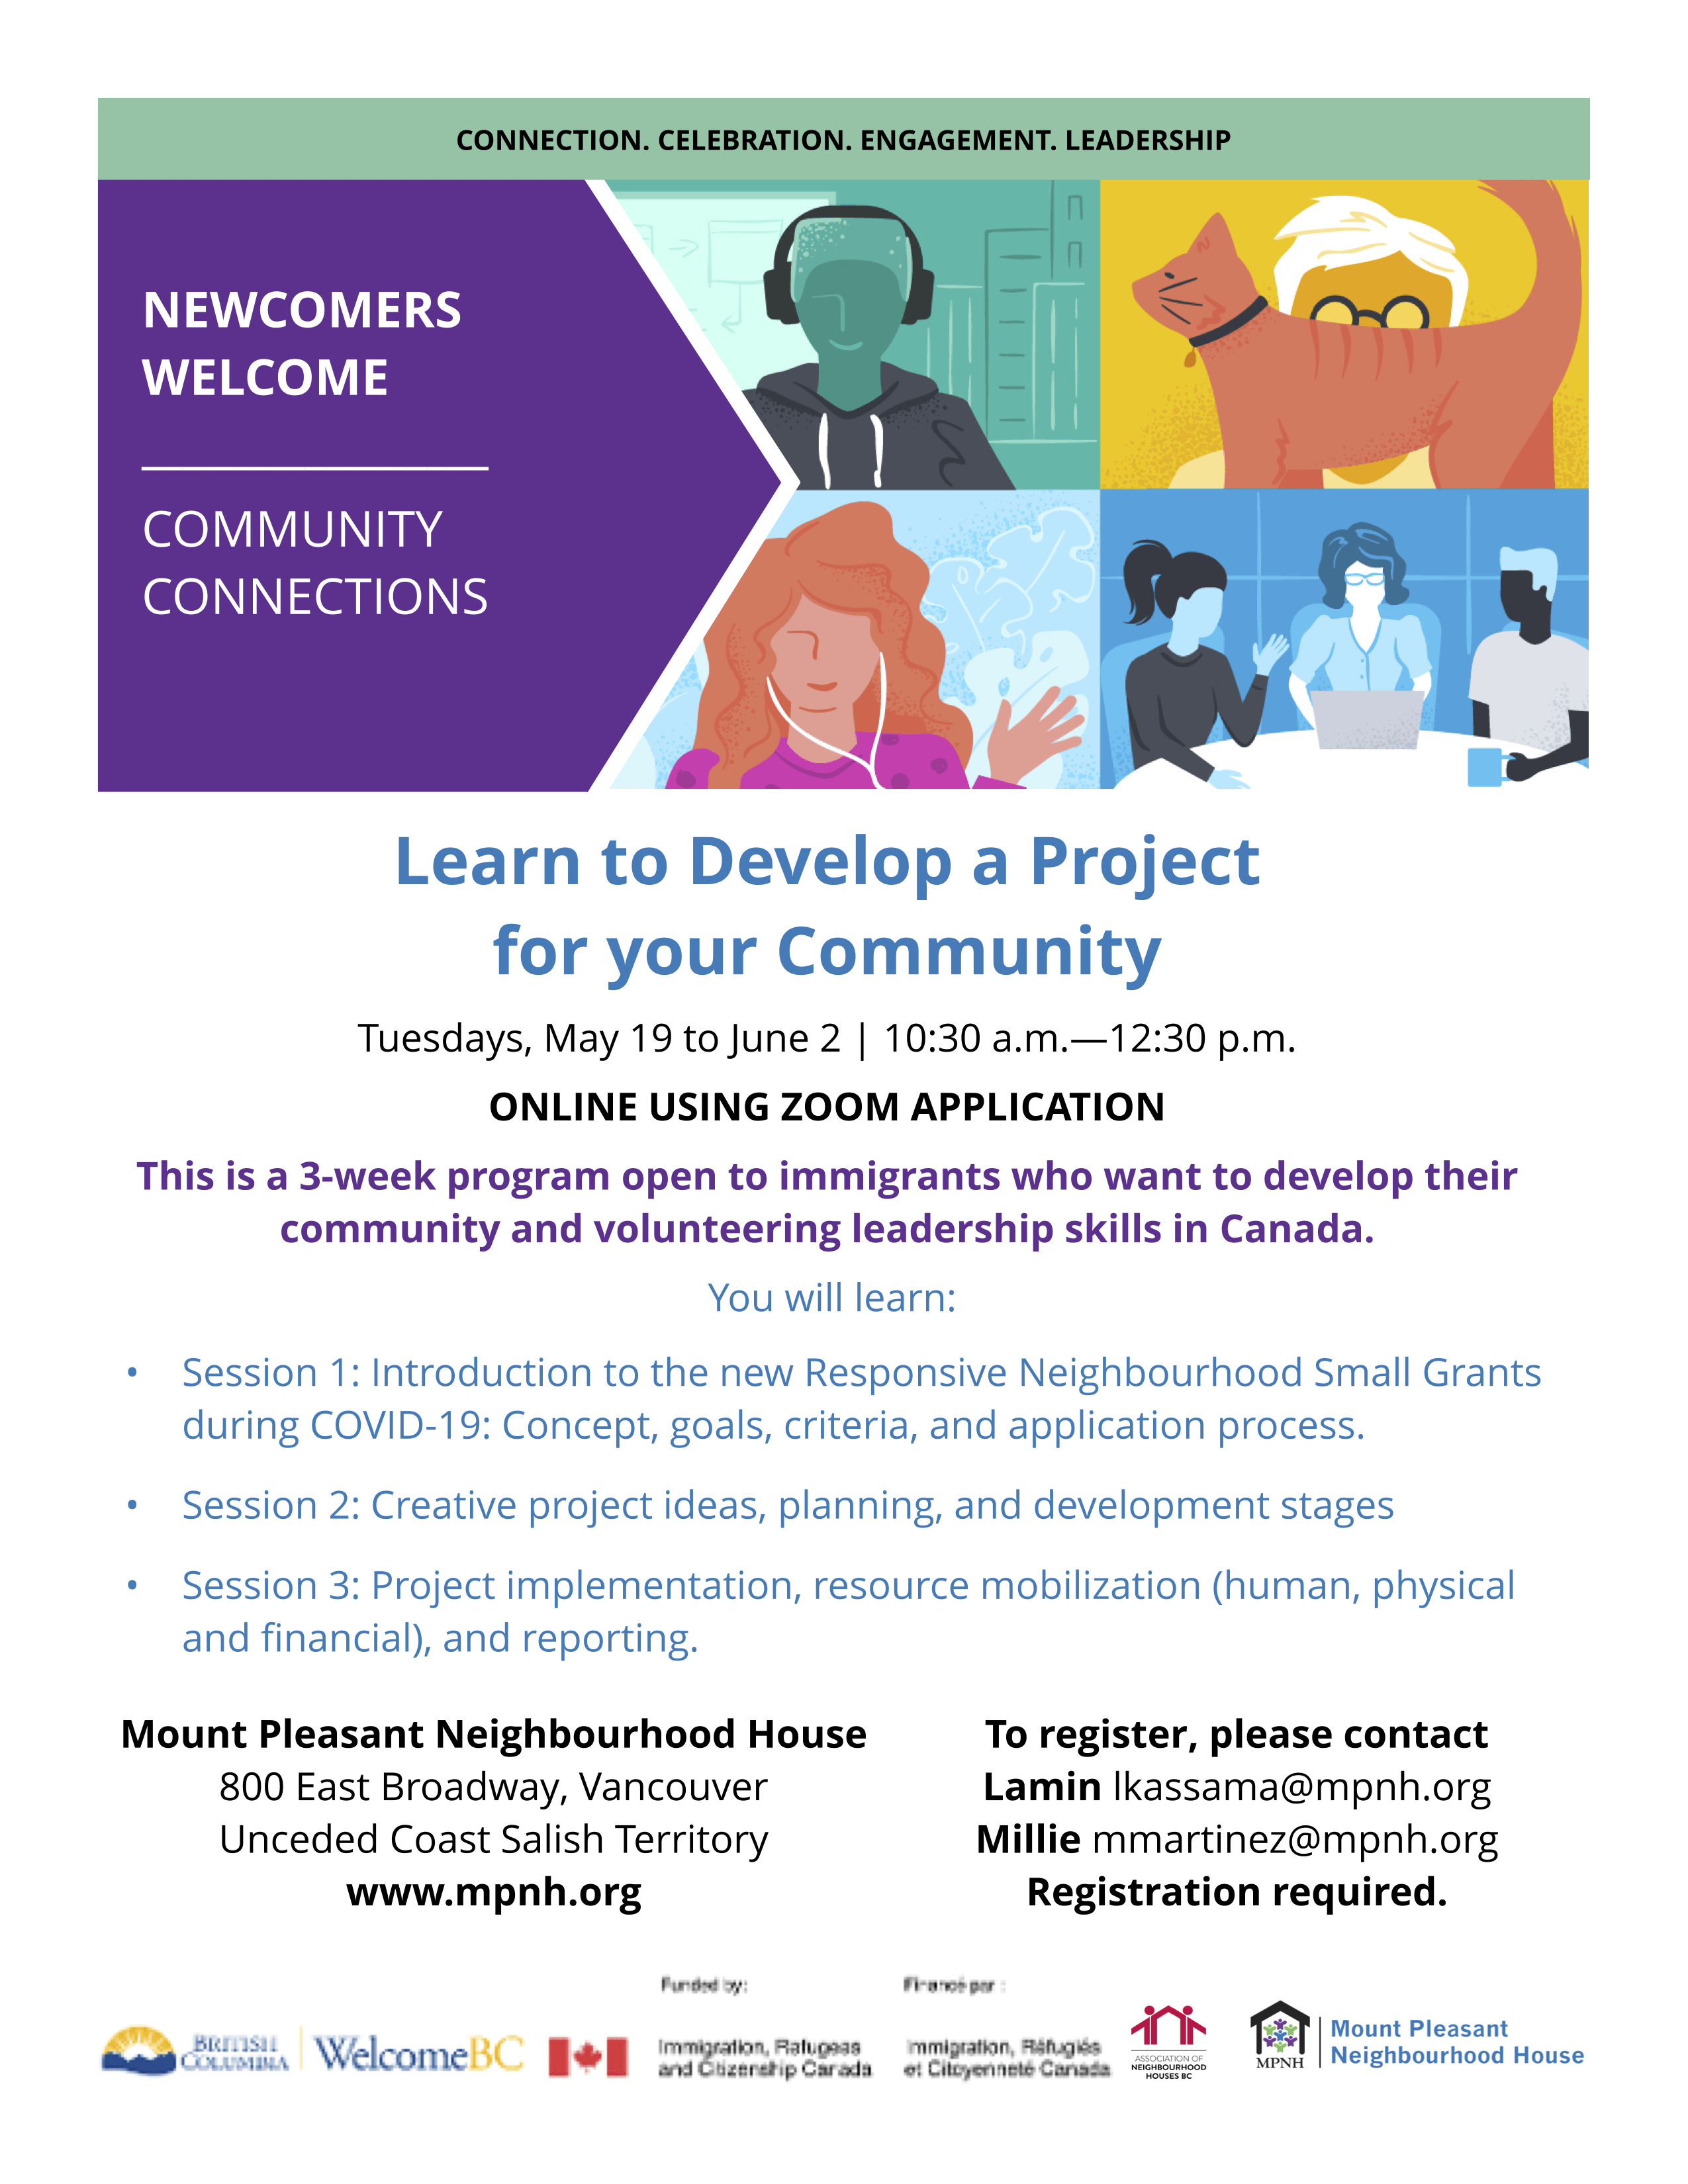 A poster for the Learn to develop a project for your community